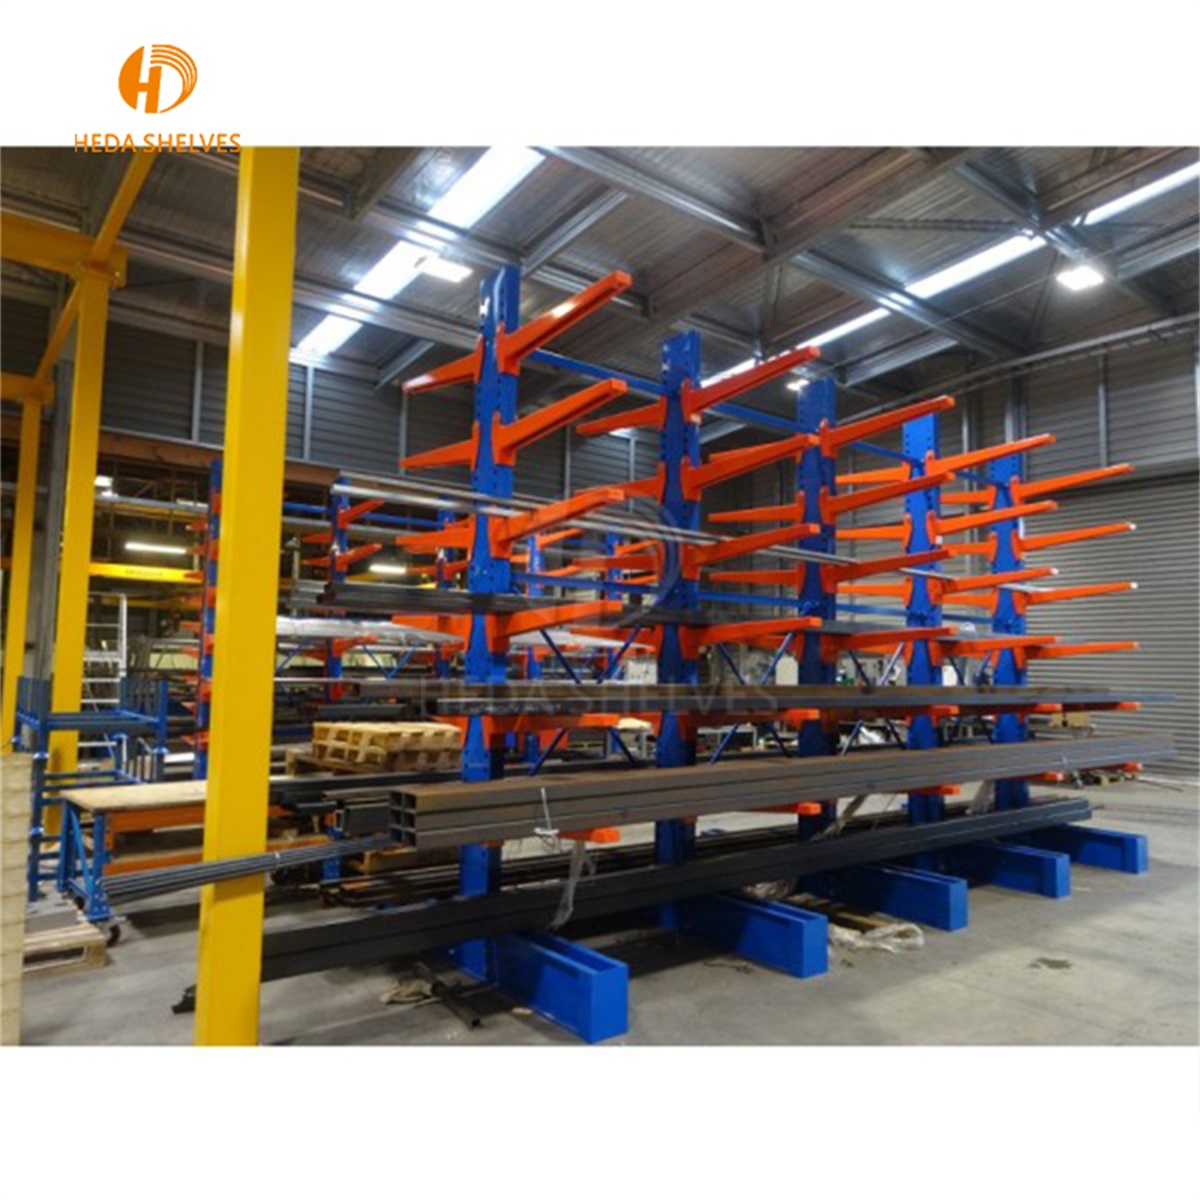 cantilever racking,heavy duty cantilever rack,tube racking,cantilever rack manufacturers,tube storage,warehouse storage,pallet rack(2